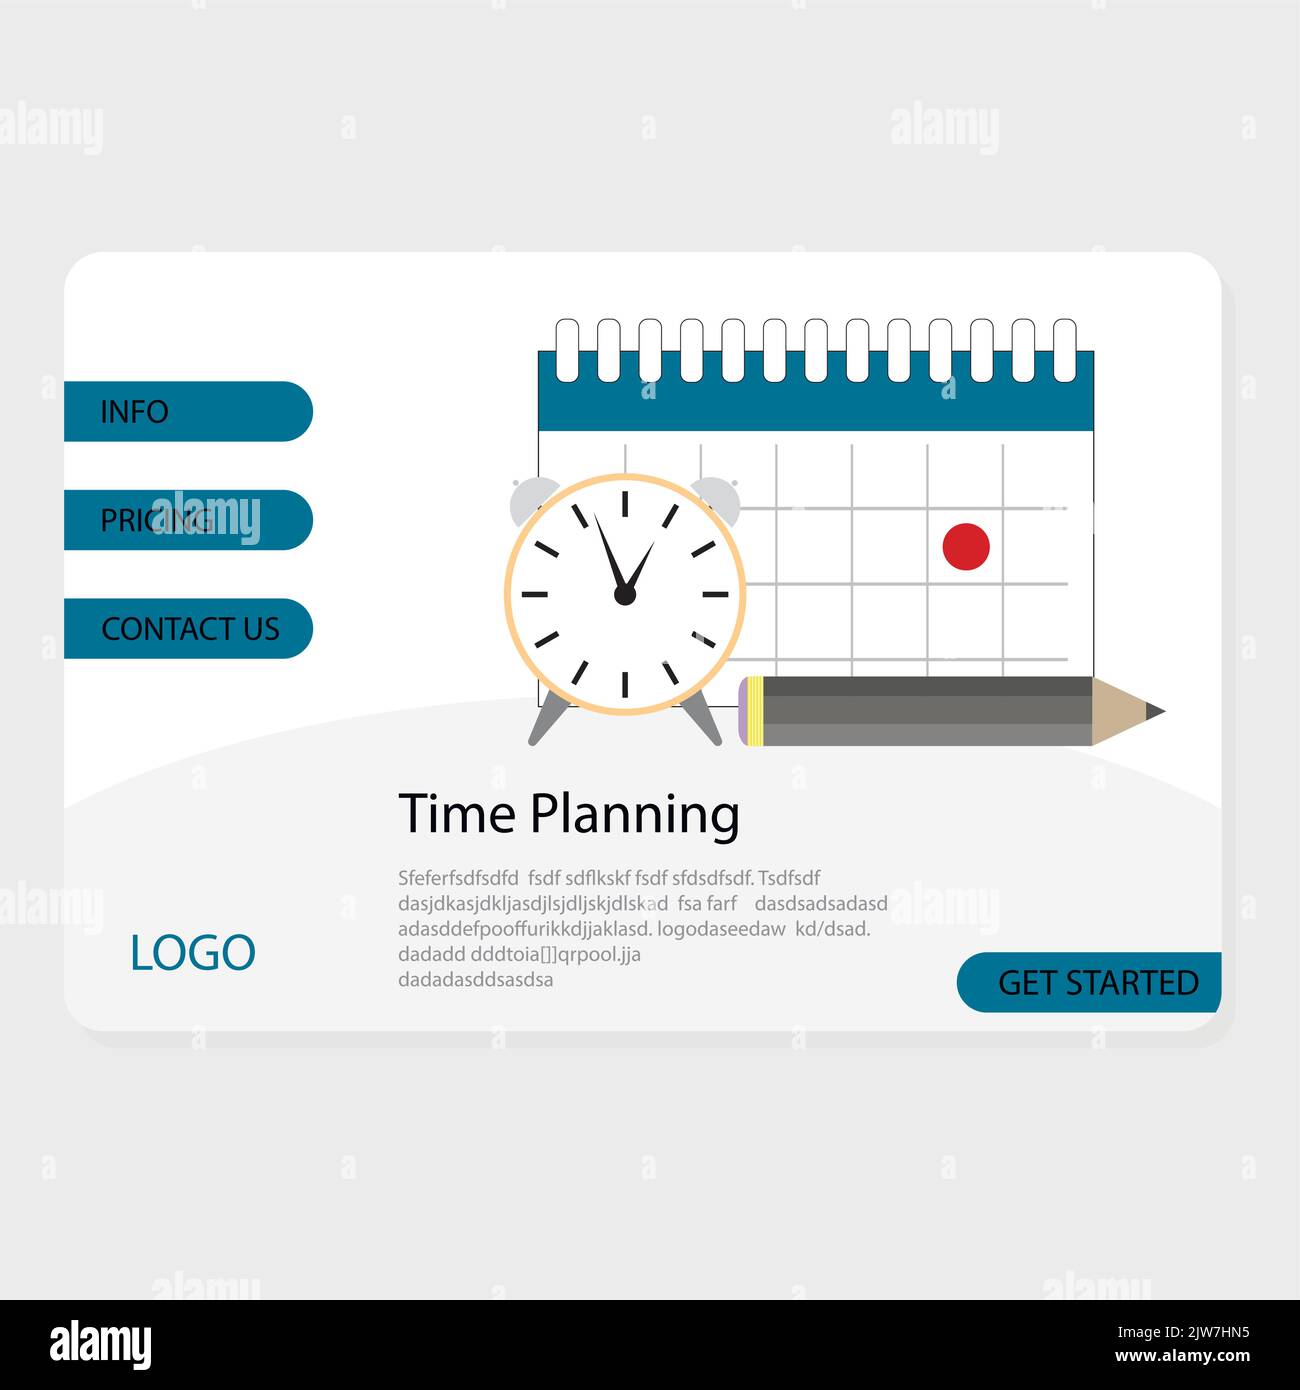 Time planning fot business, optimization of workflow and control time landing page. Vector illustration. Planning banner, web work, business concept c Stock Vector